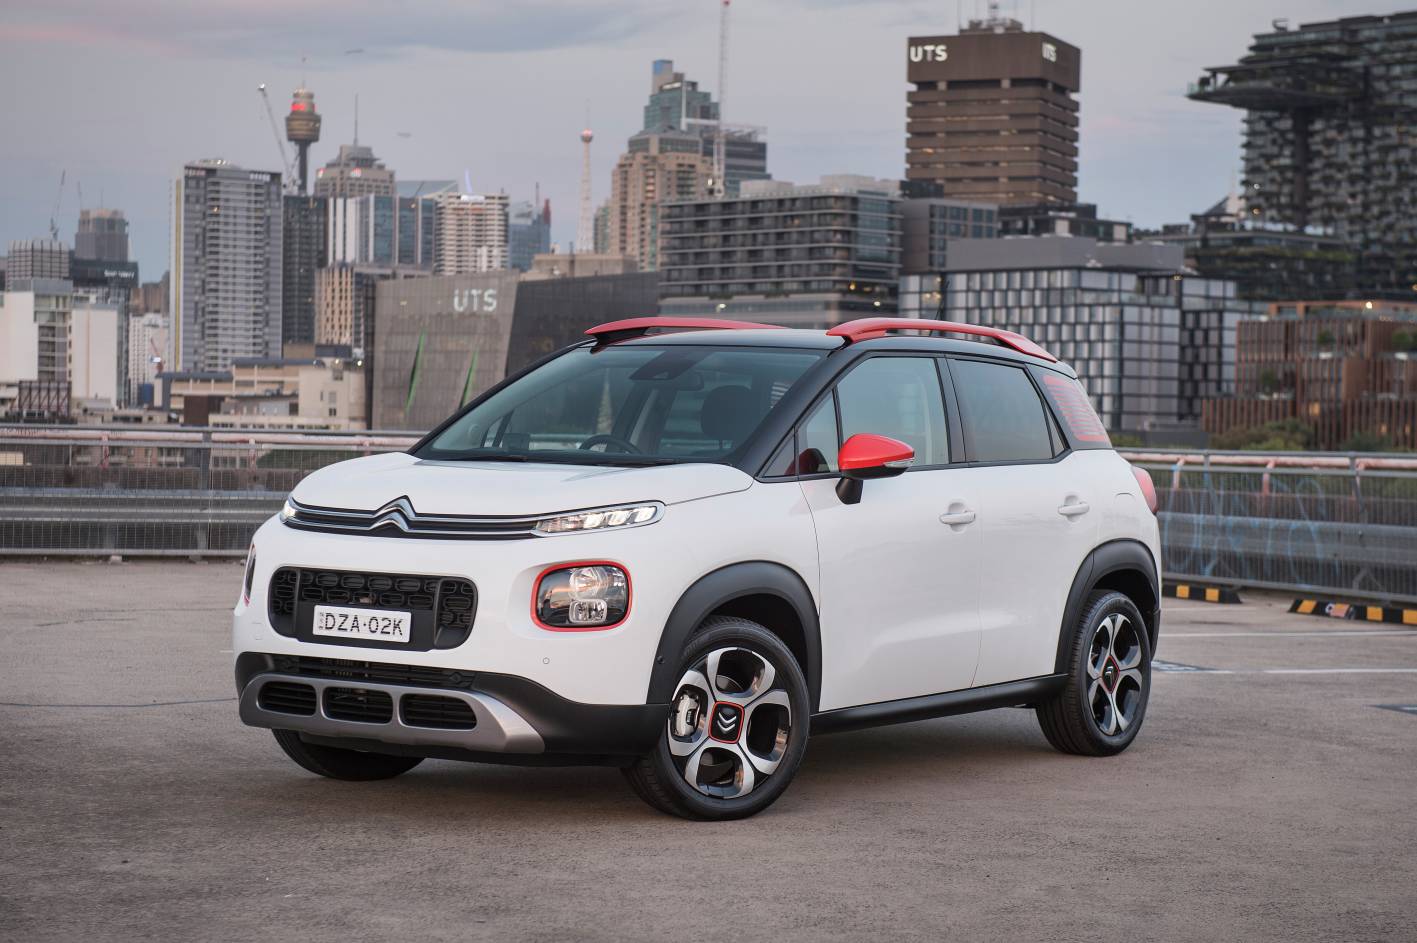 Citroen C3 Aircross Suv An Appealing Different City Suv 2gb